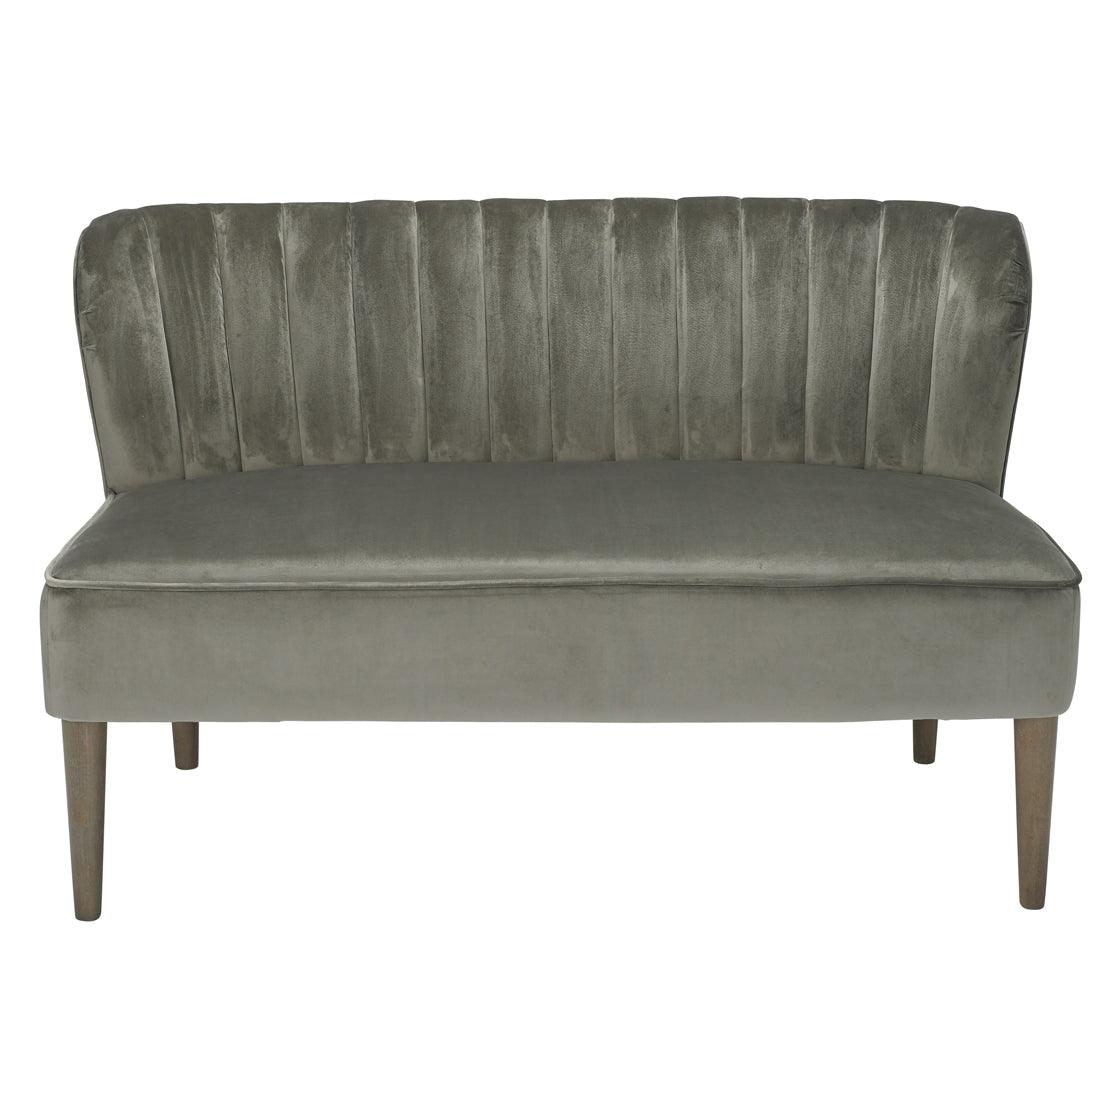 Bella 2 Seater Sofa Steel Grey - loveyourbed.co.uk